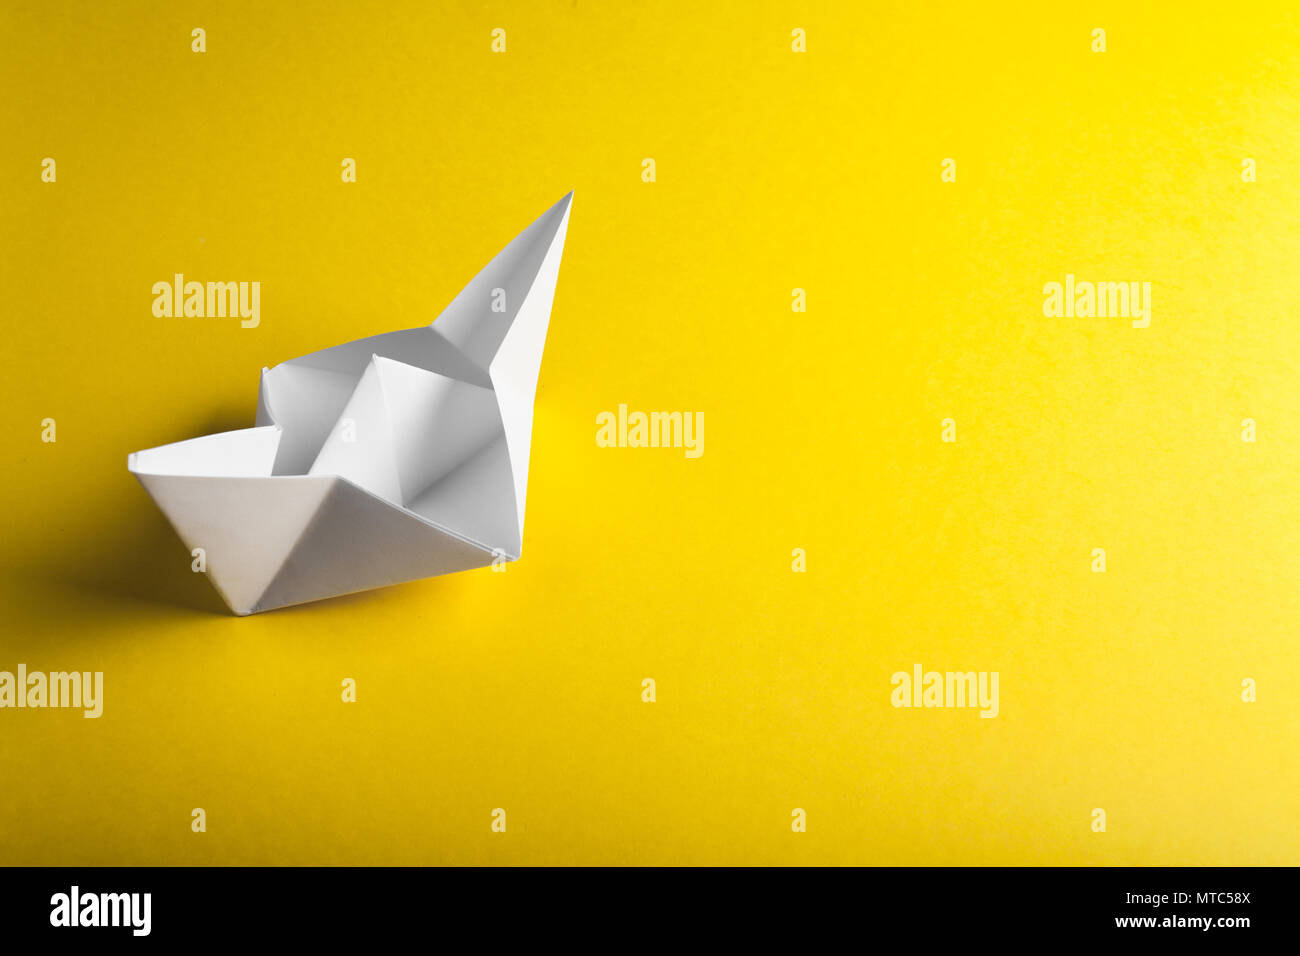 boat paper origami on the yellow background Stock Photo